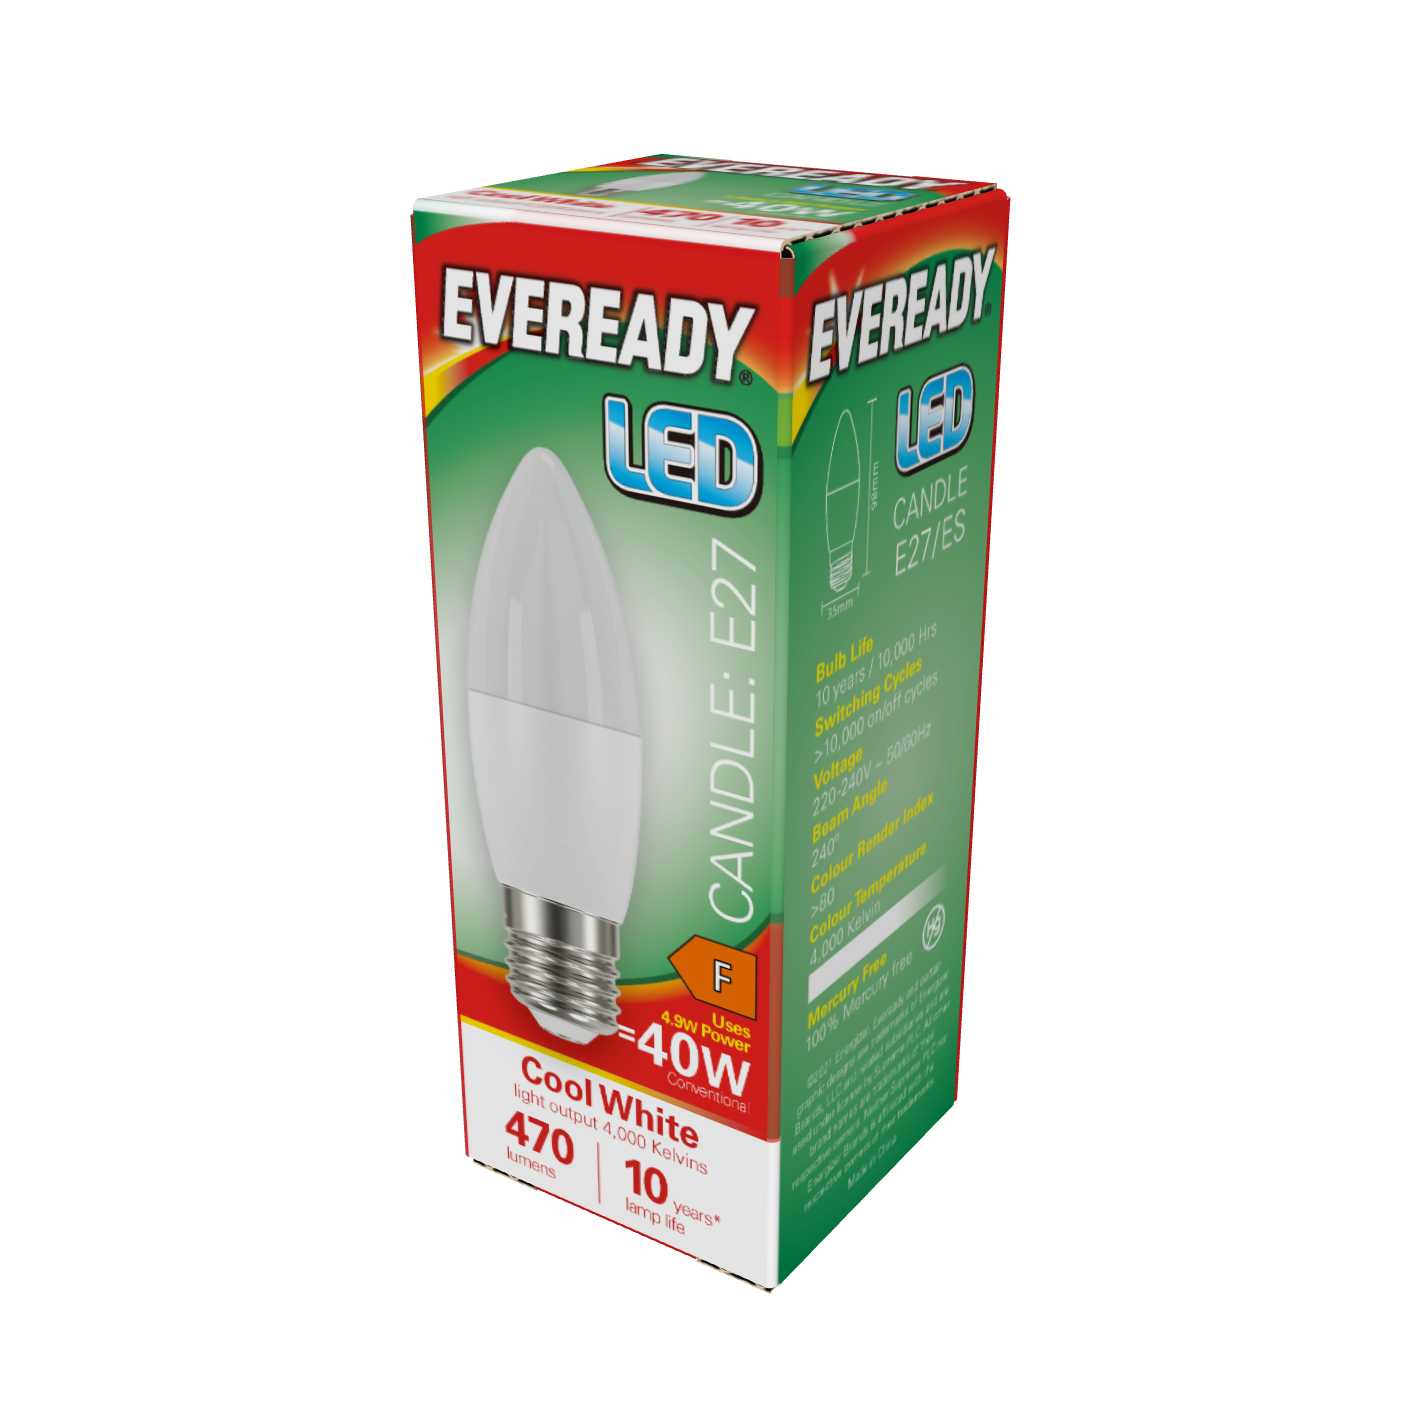 Eveready LED Candle E27 (ES) 470lm 4.9W 4,000K (Cool White), Box of 1